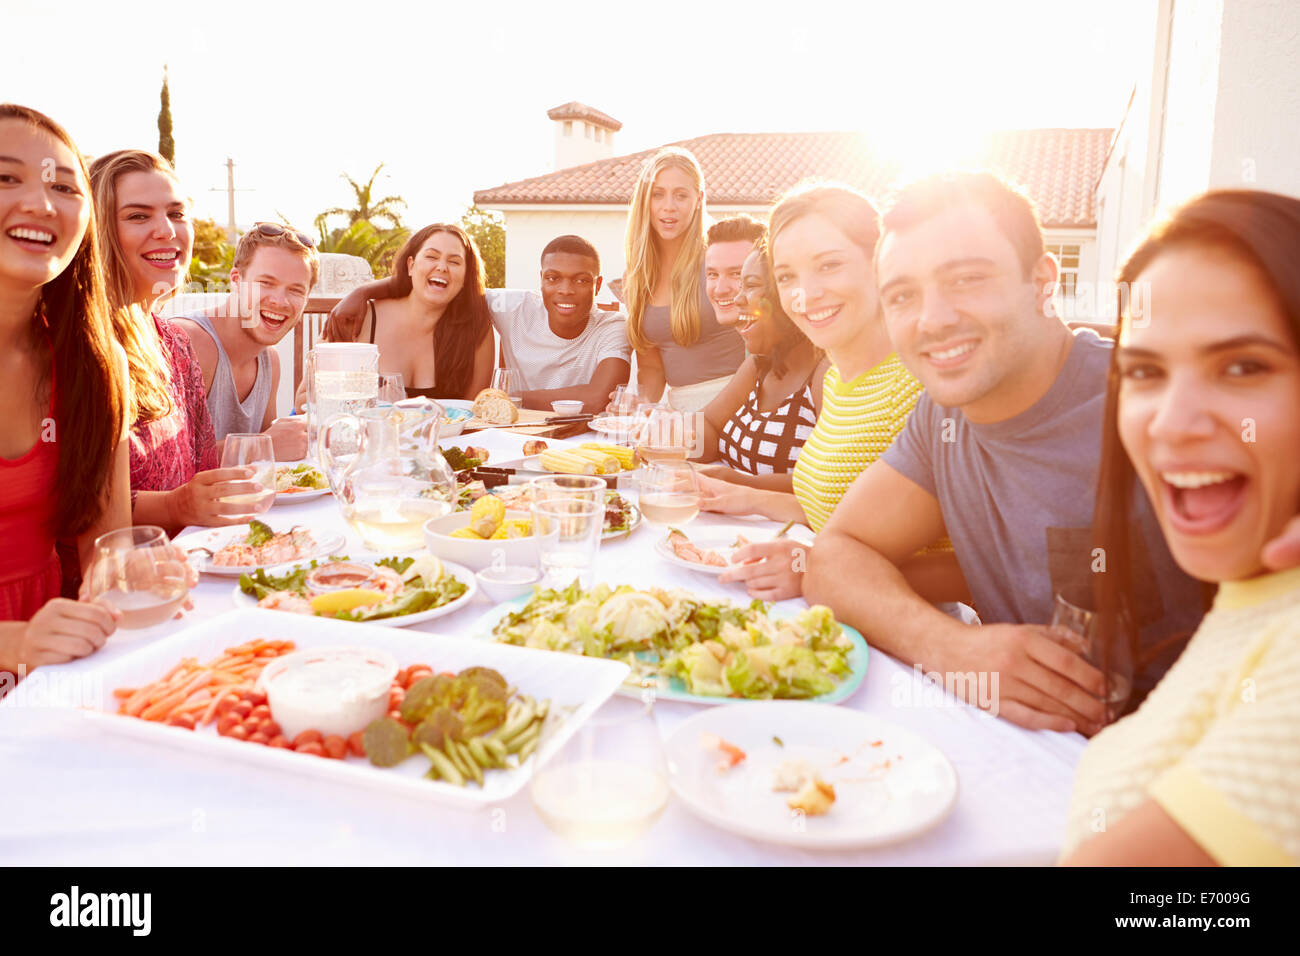 Group Of Young People Enjoying Outdoor Summer Meal Stock Photo